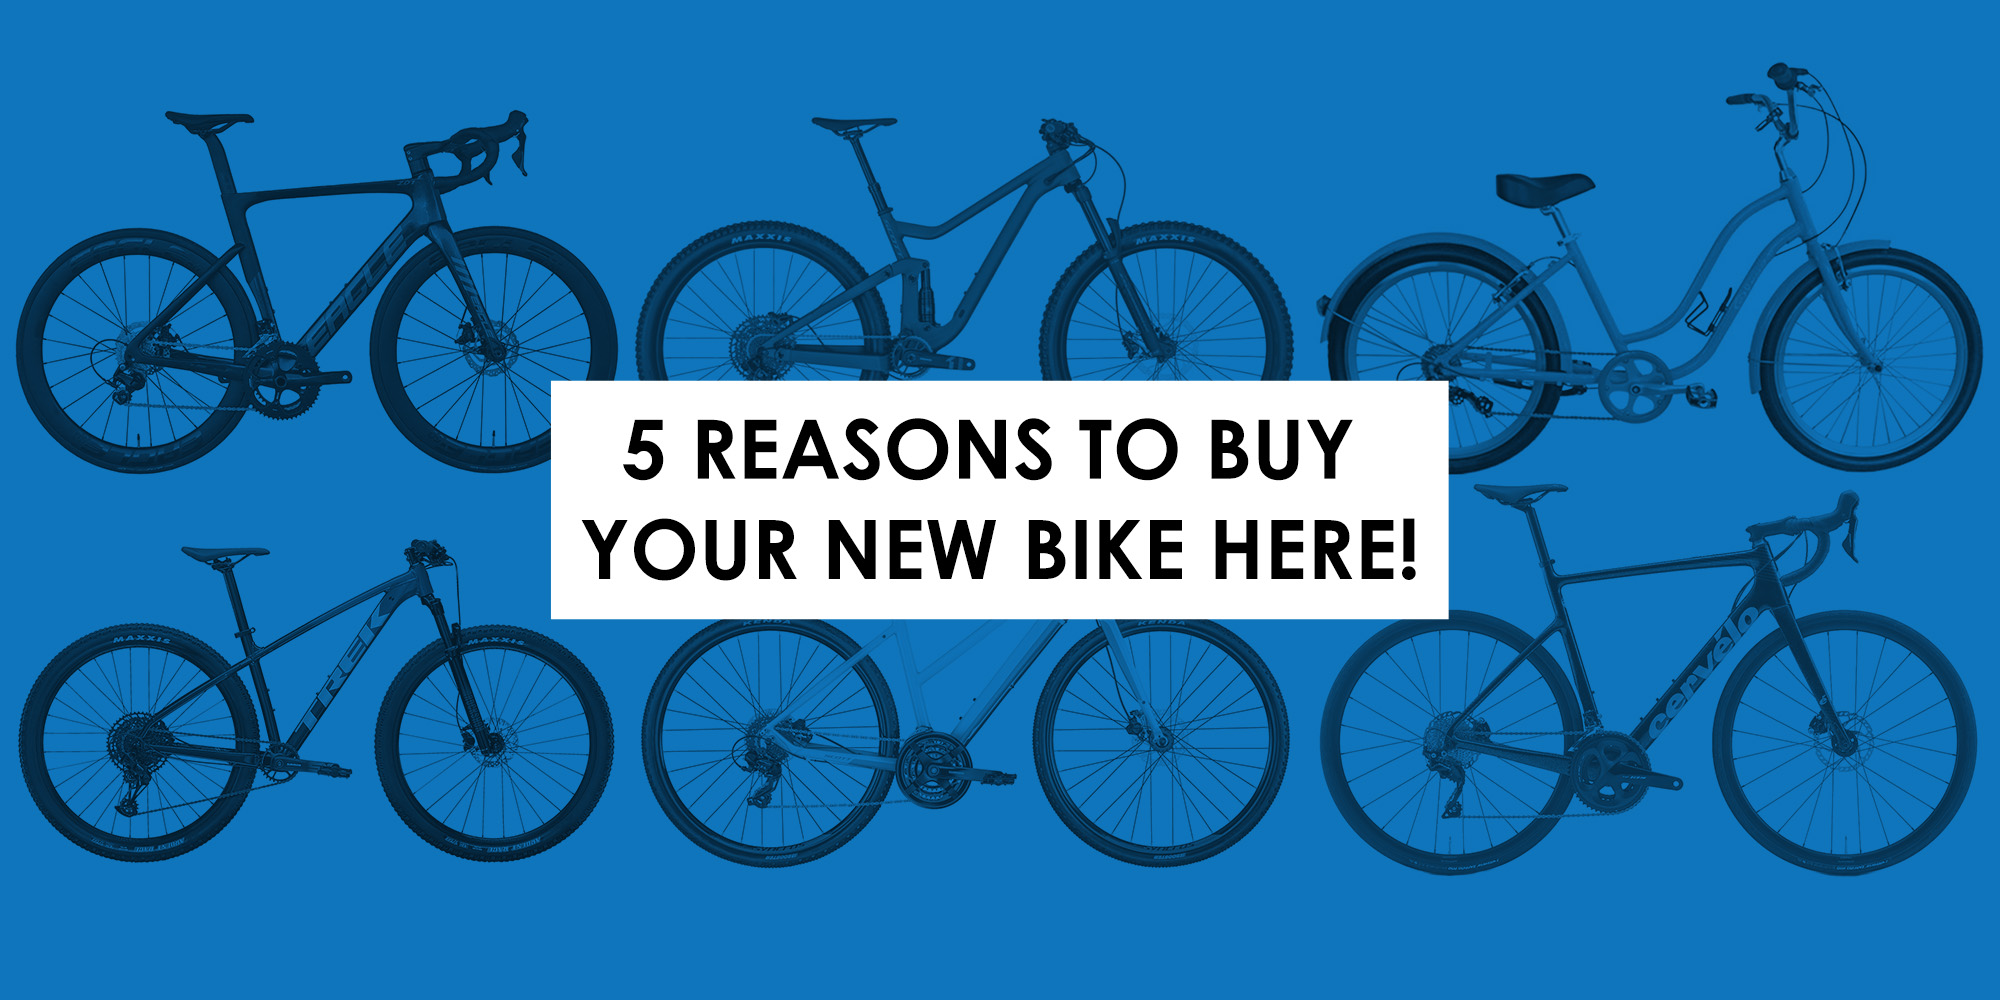 5 Reasons to Buy Your New Bike at Bikes Palm Beach!